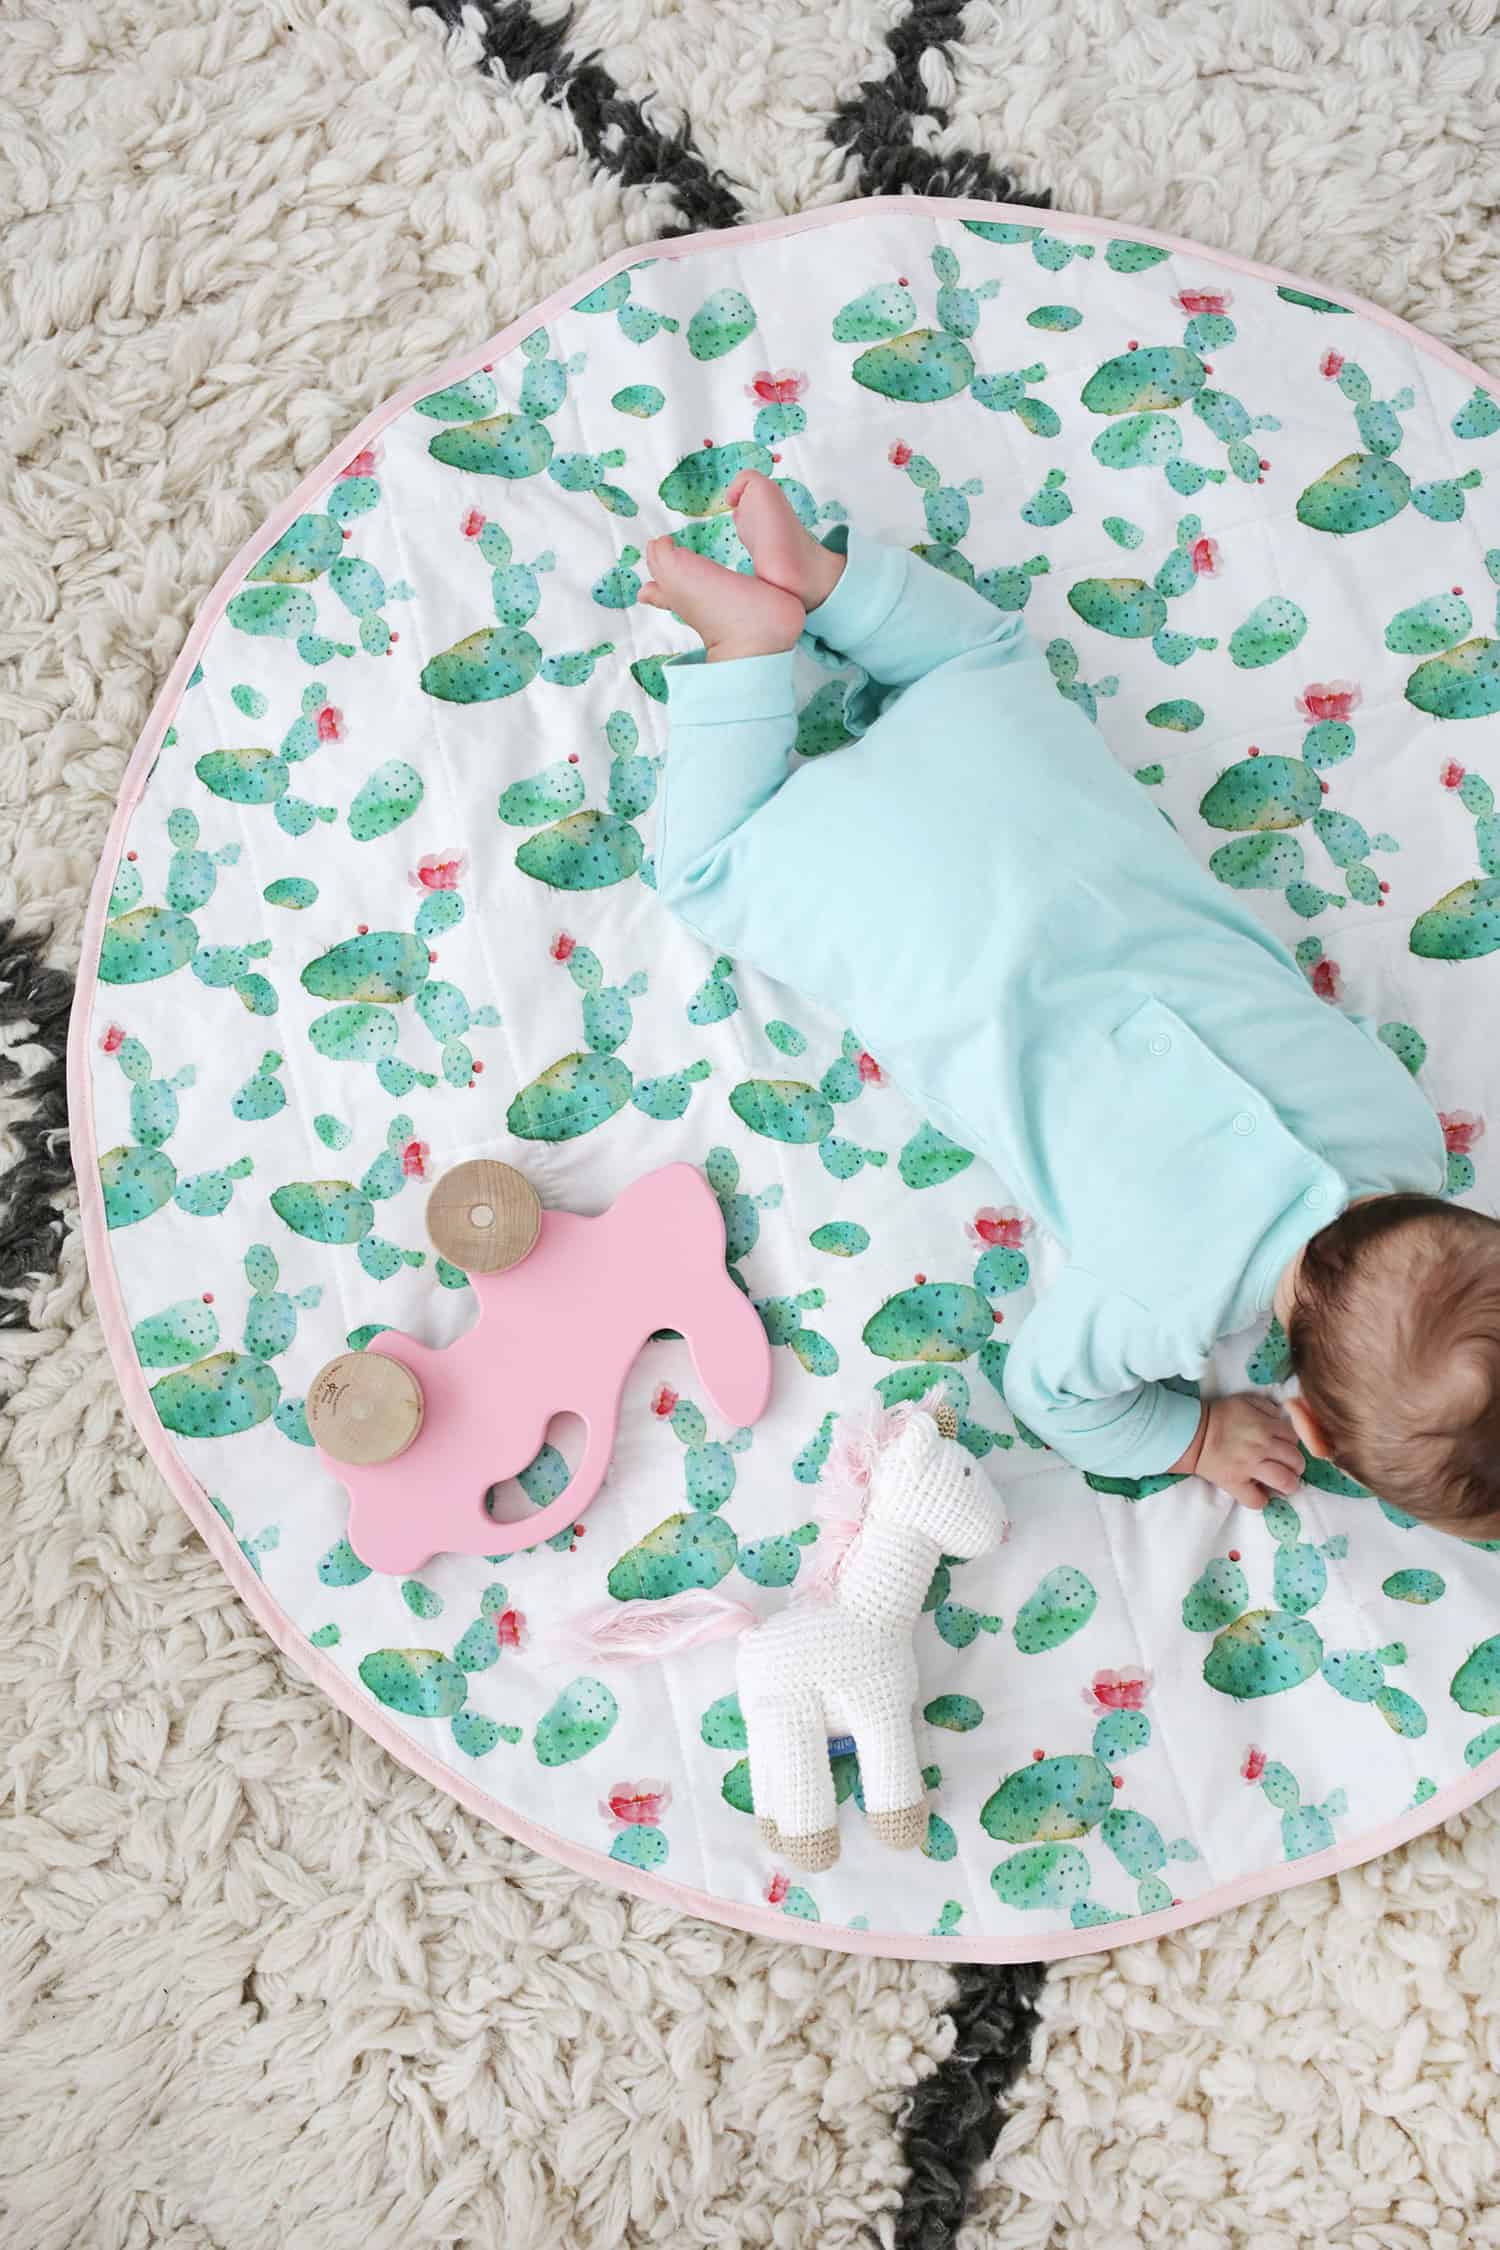 baby on round quilted mat with wooden pink bunny on wheels and stuffed horse